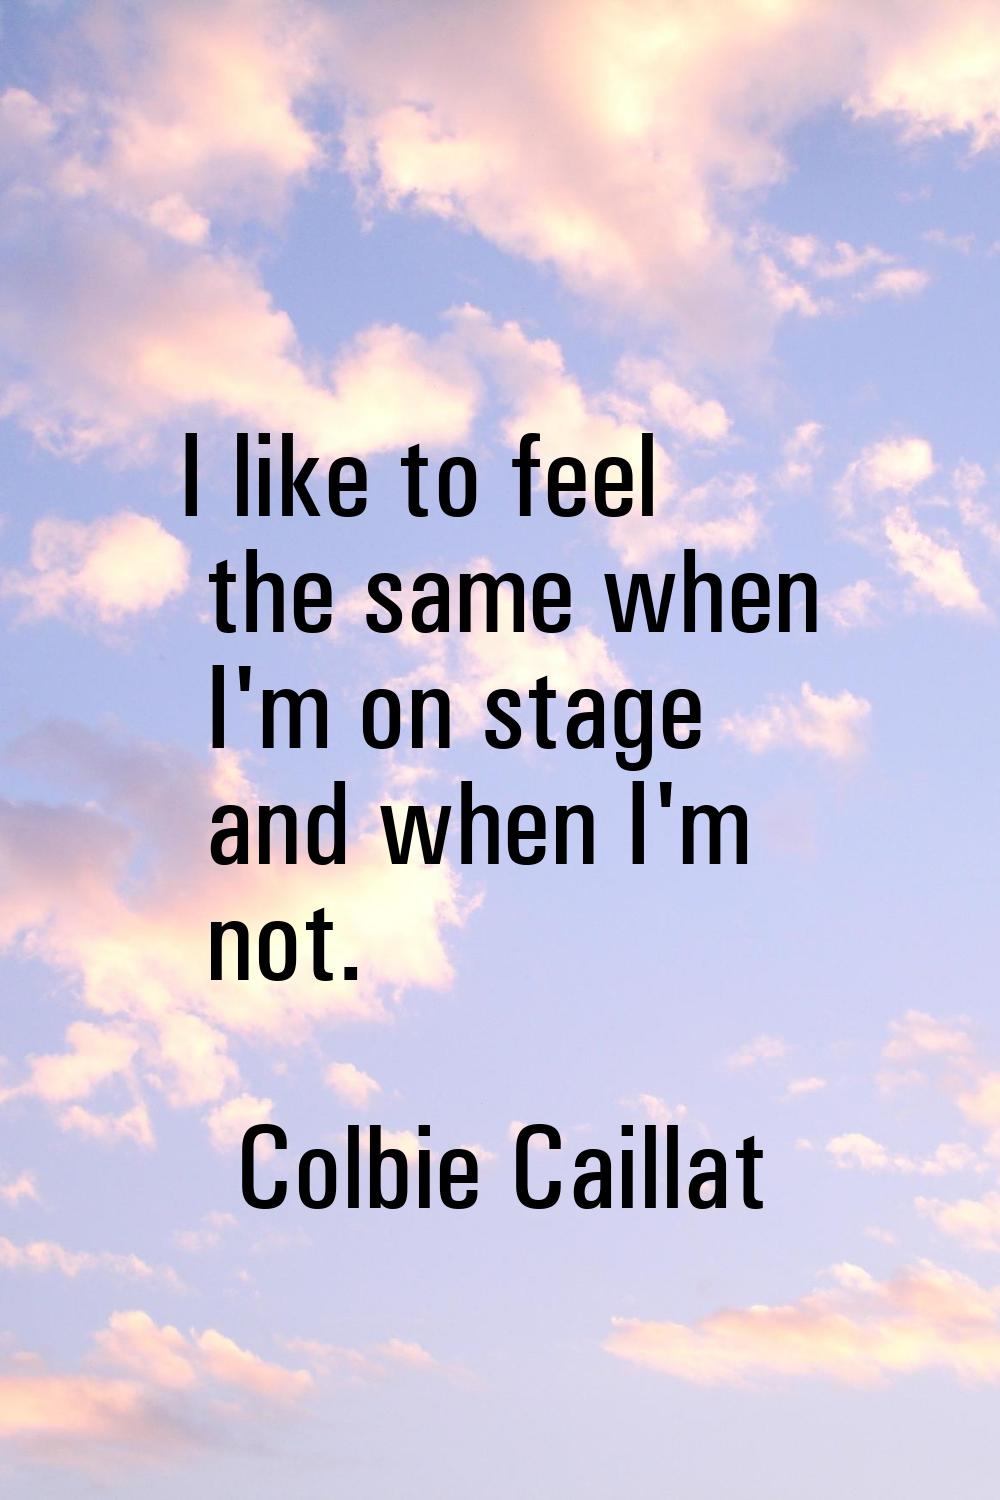 I like to feel the same when I'm on stage and when I'm not.